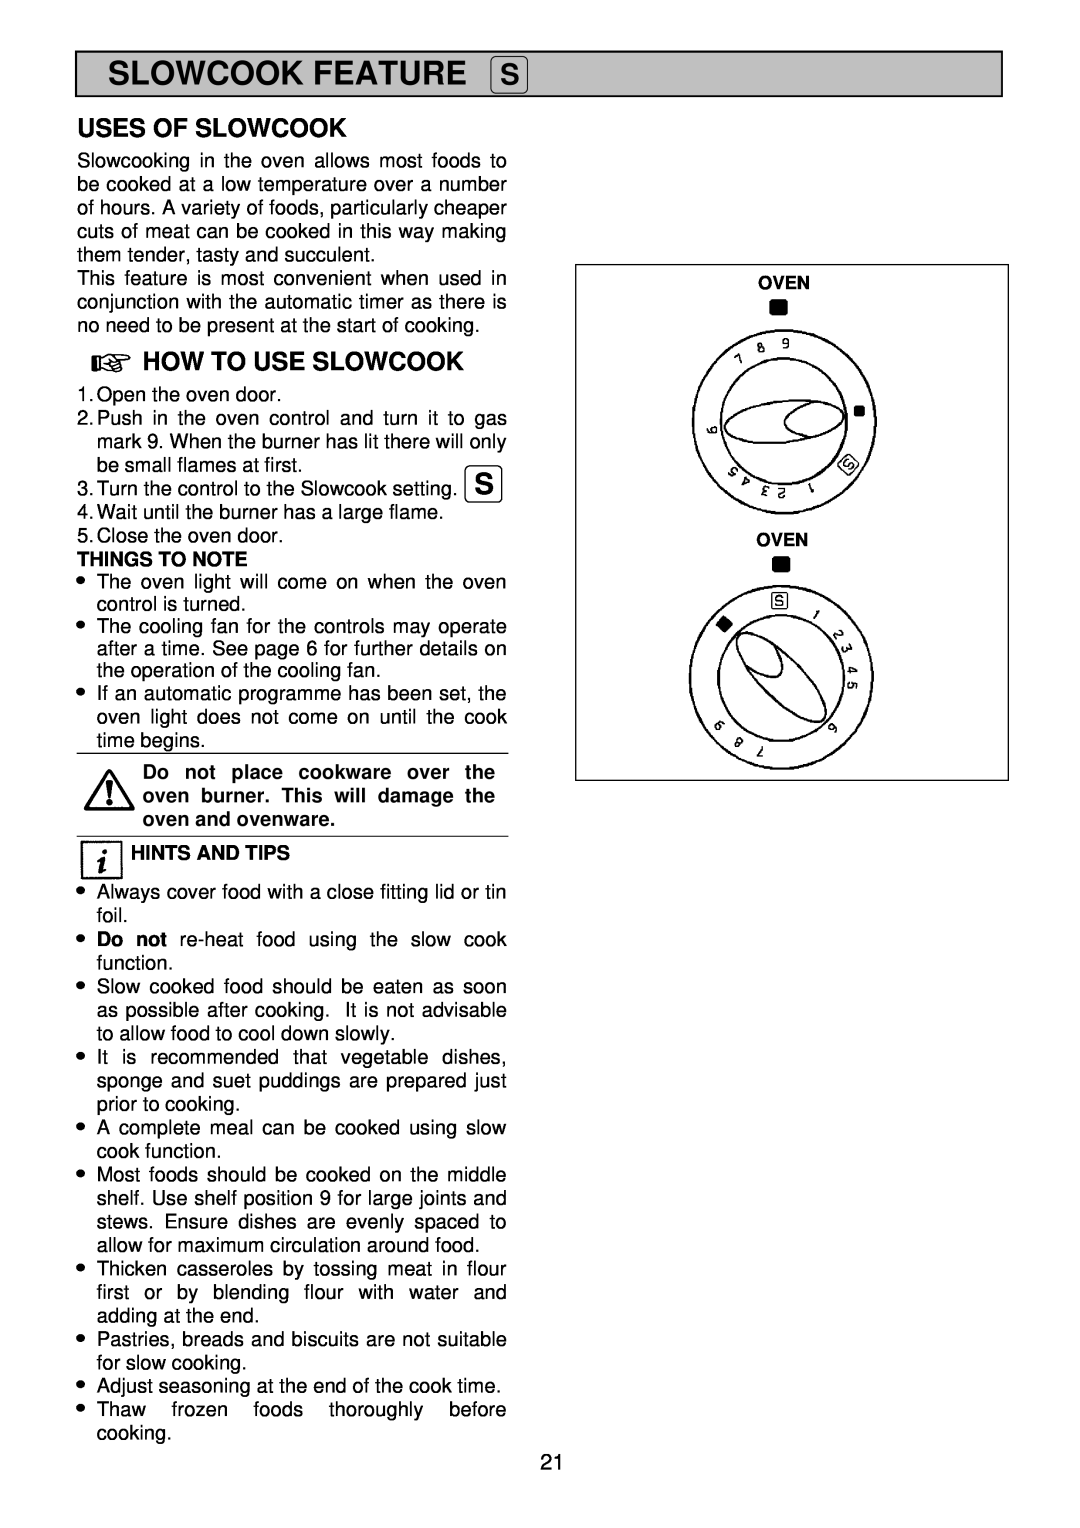 Electrolux EDB 872 manual Slowcook Feature S, Uses Of Slowcook, How To Use Slowcook, Things To Note, Hints And Tips 